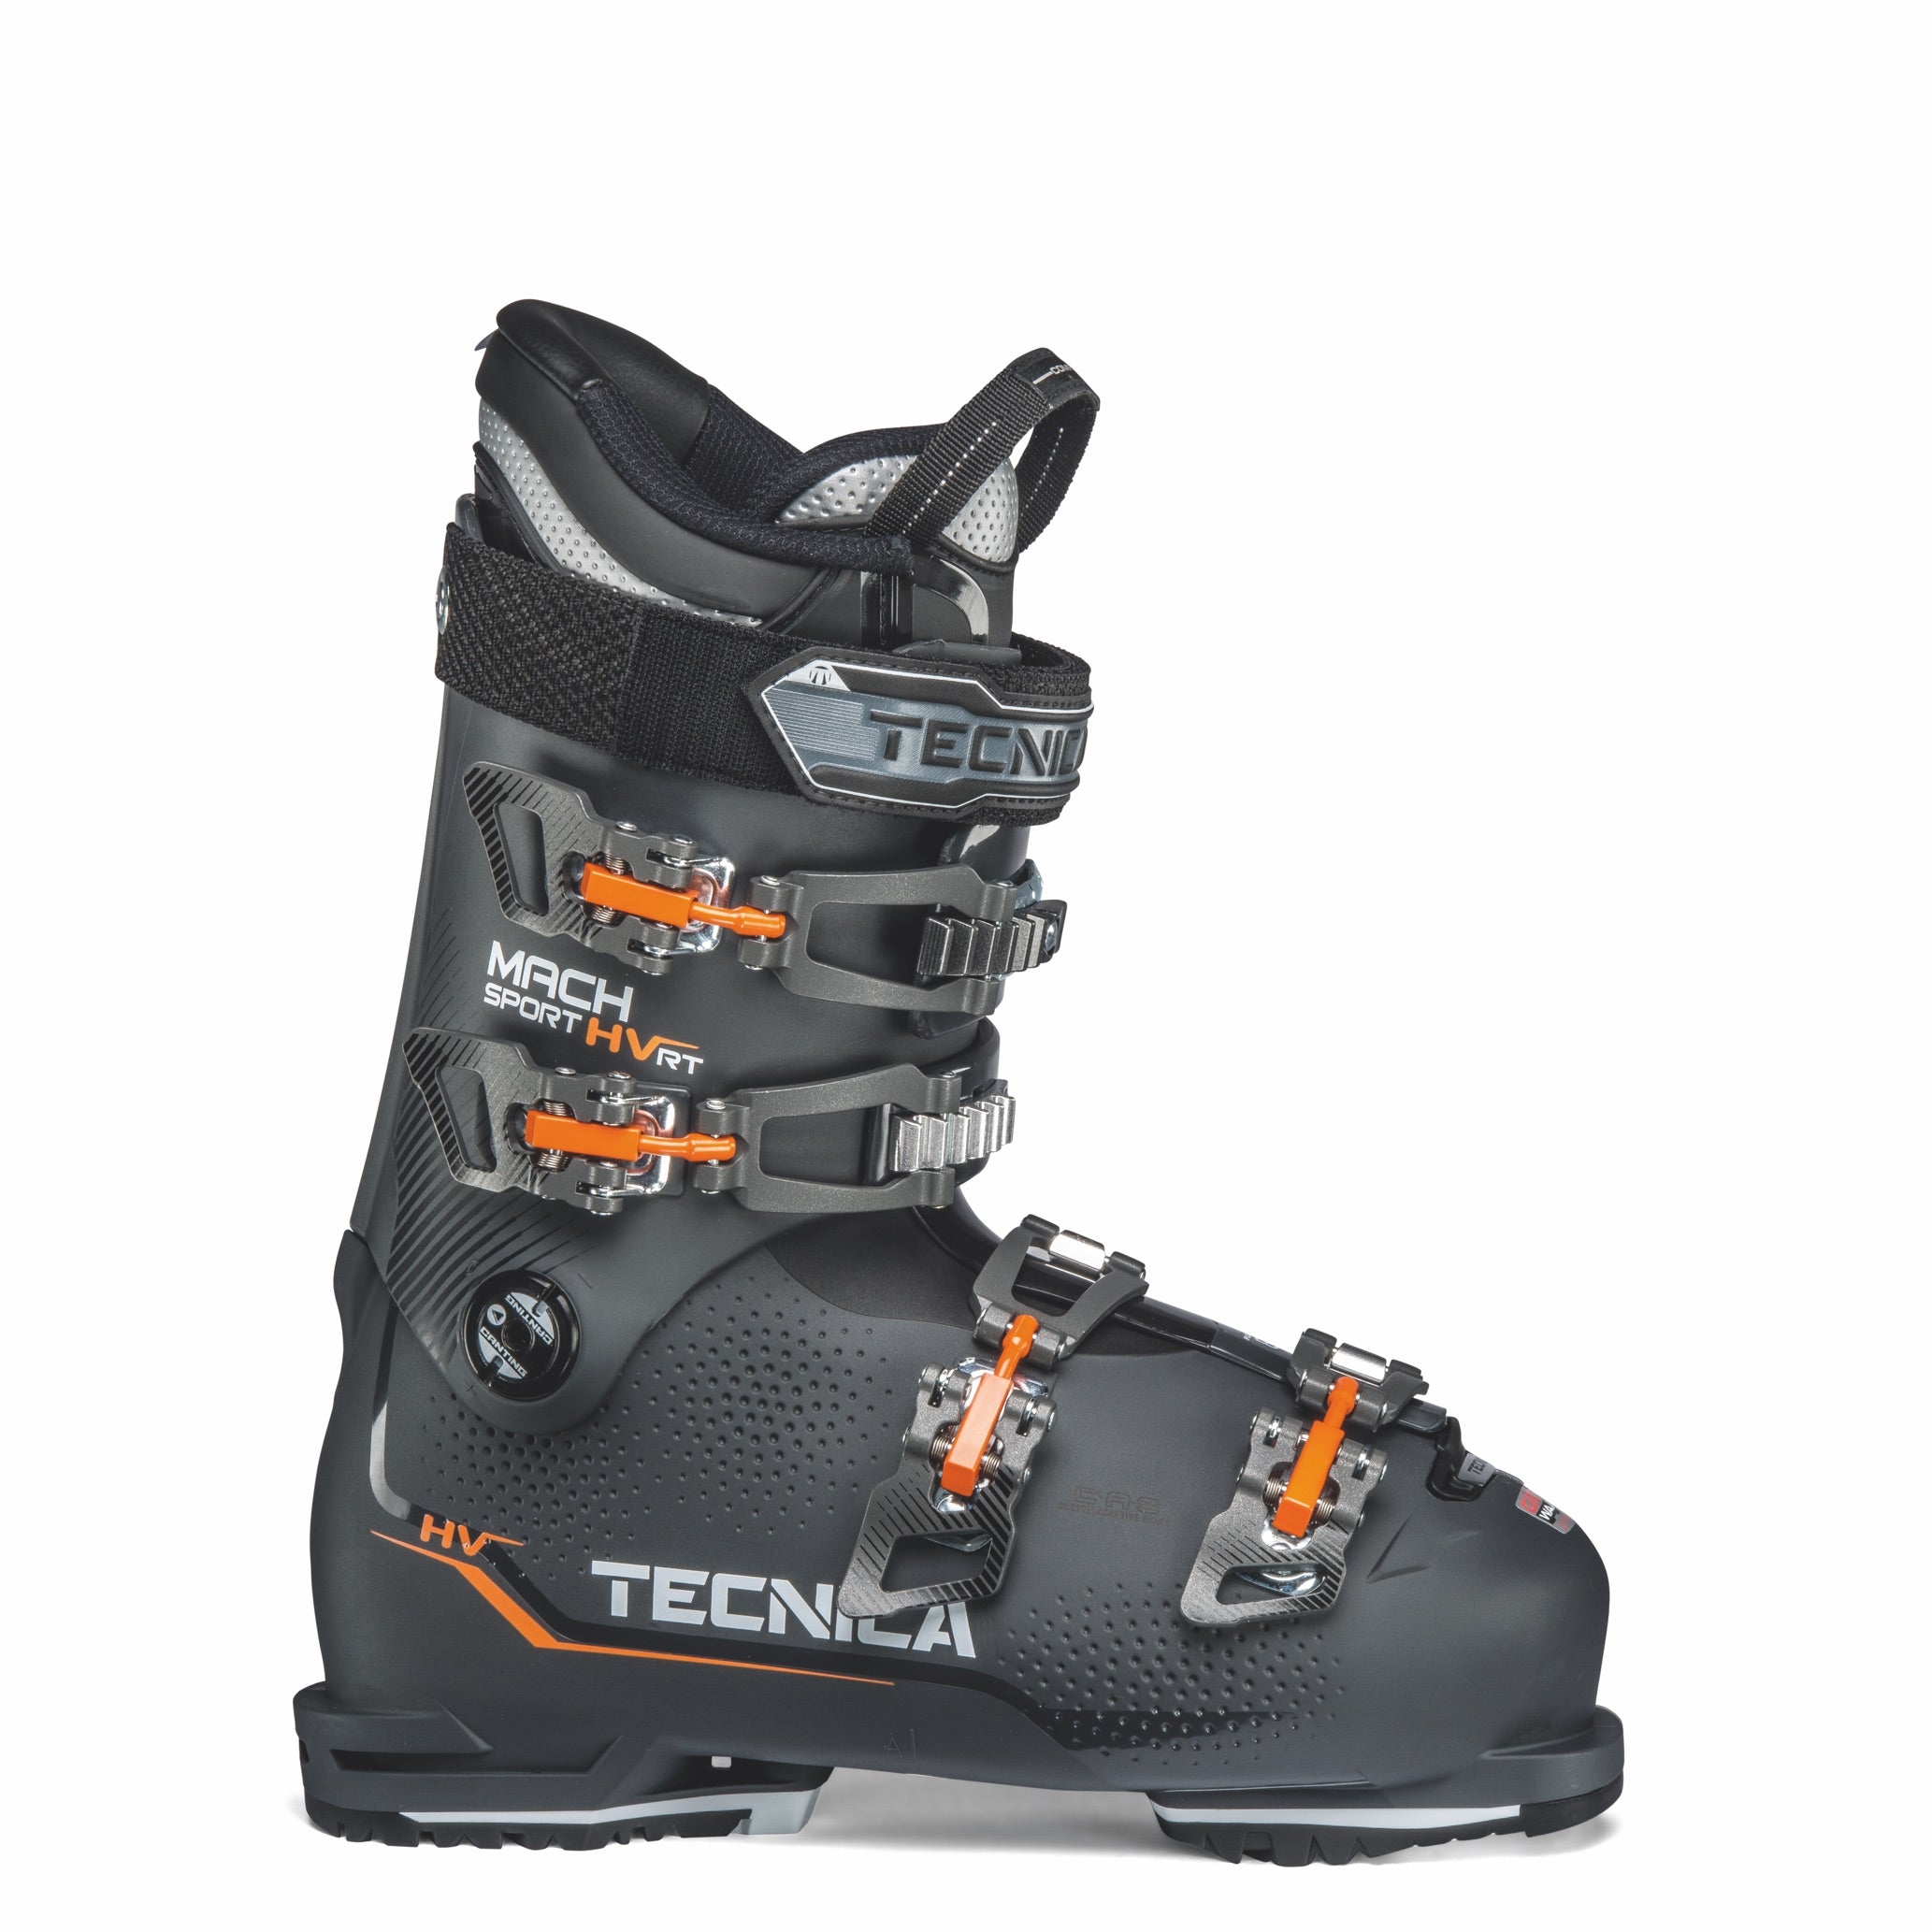 Demo to Purchase - Mount Snow - $70.00